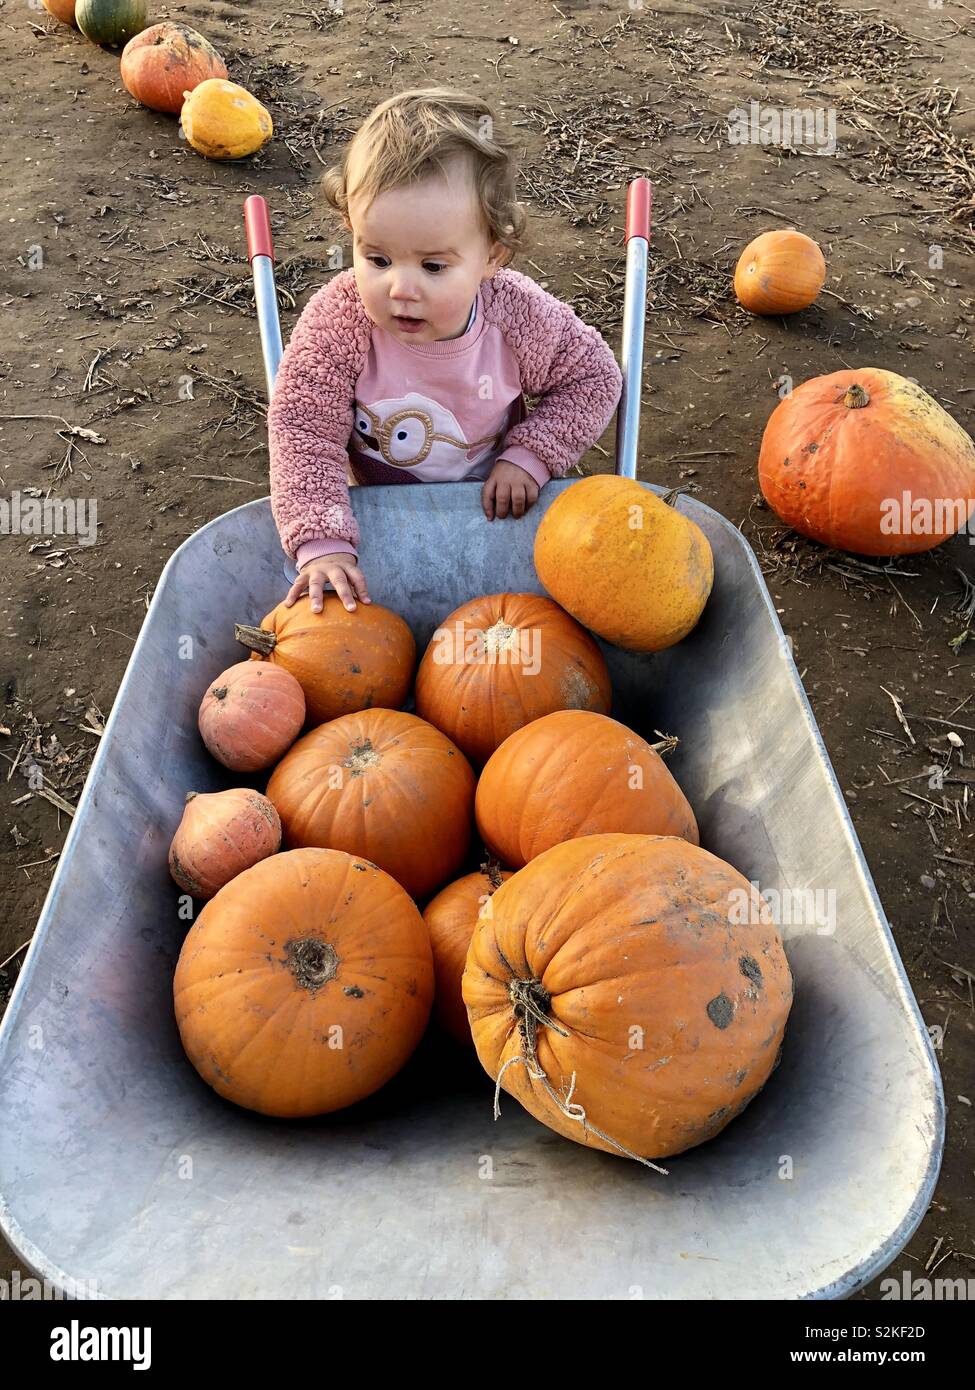 Adorable Baby Girl with Cowboy Hat in a Country Rustic Setting at the  Pumpkin Patch Stock Photo - Alamy